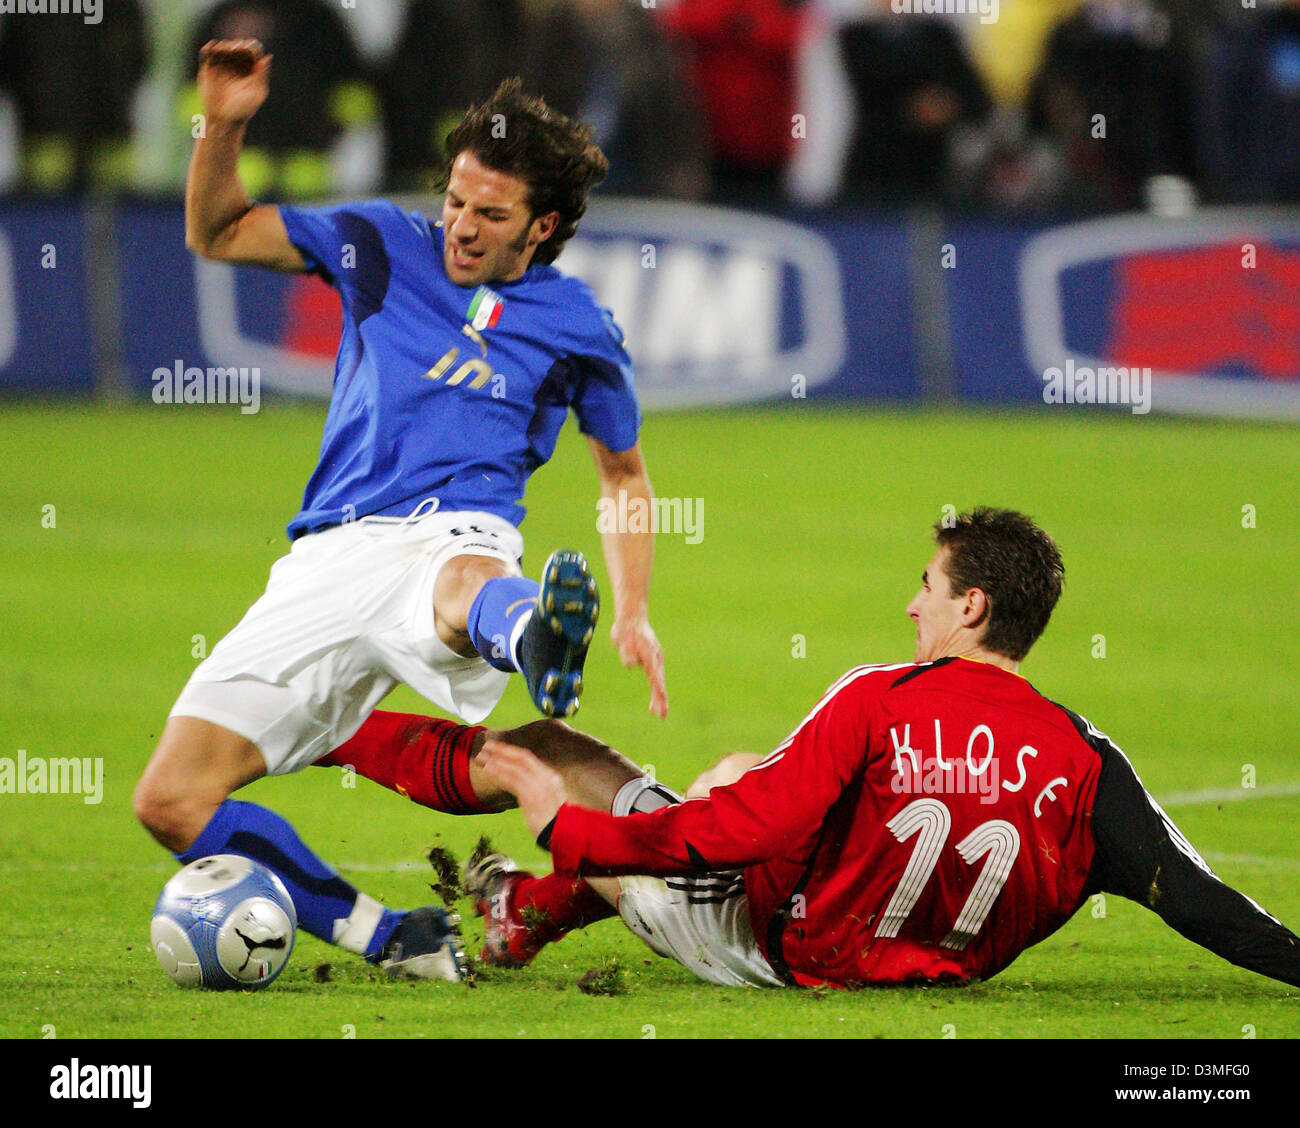 Italy's Alessandro Del Piero (L) fights with German national soccer player Miroslav Klose for the ball during the international friendly in Florence, Italy, Wednesday, 01 March 2006. Italy thumped World Cup hosts Germany 4-1 in a surprisingly one-sided match. Two goals in the first seven minutes from Gilardino and Toni put the Italians in control. De Rossi's header made it three an Stock Photo